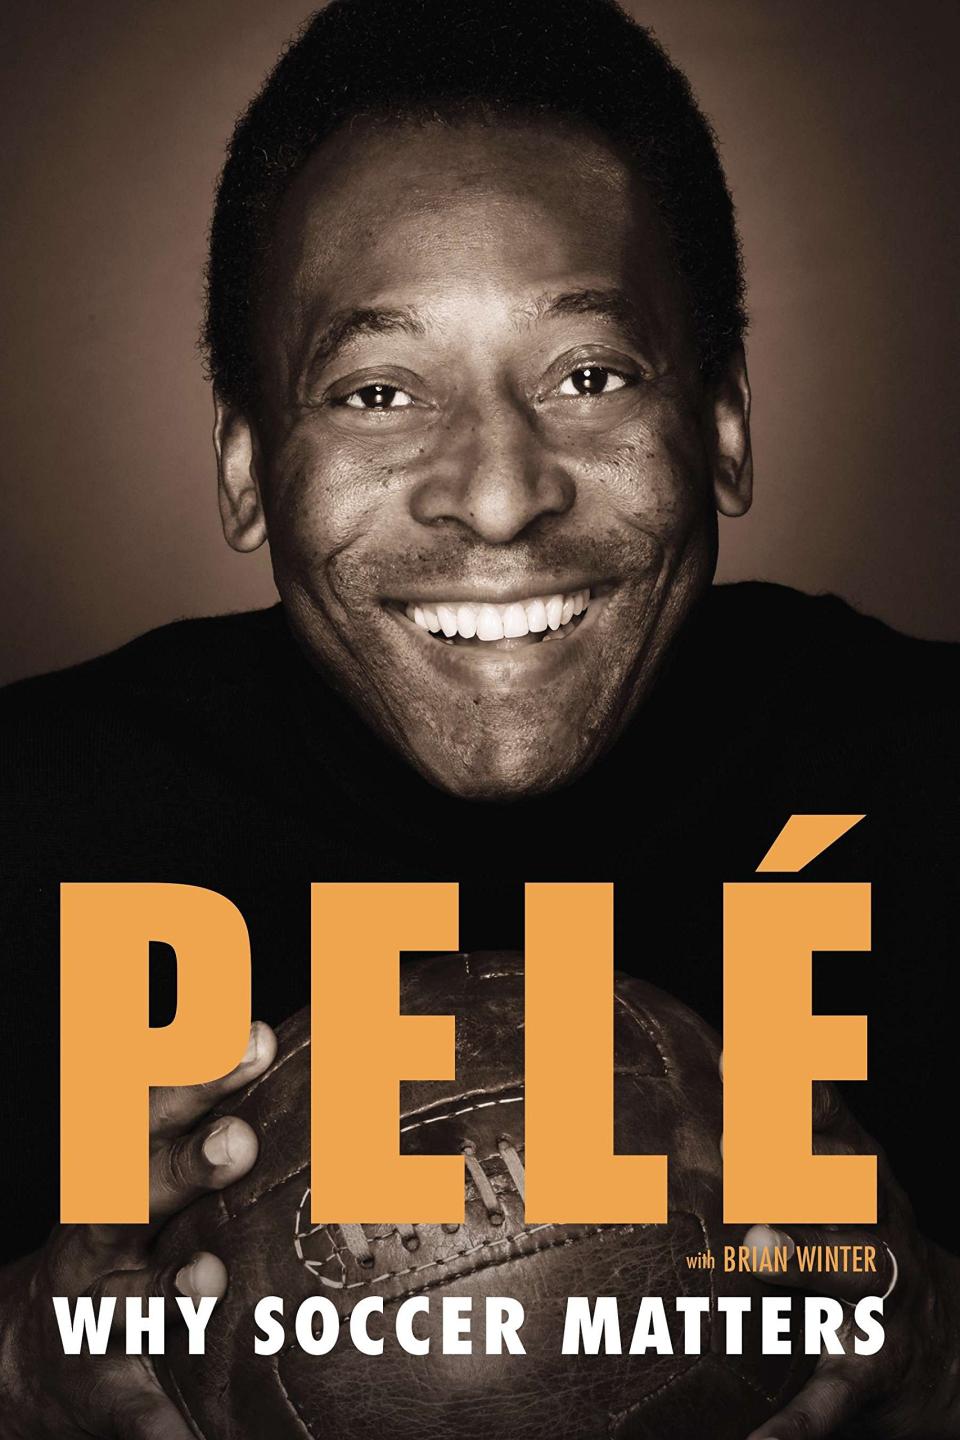 "Why Soccer Matters" by Pele